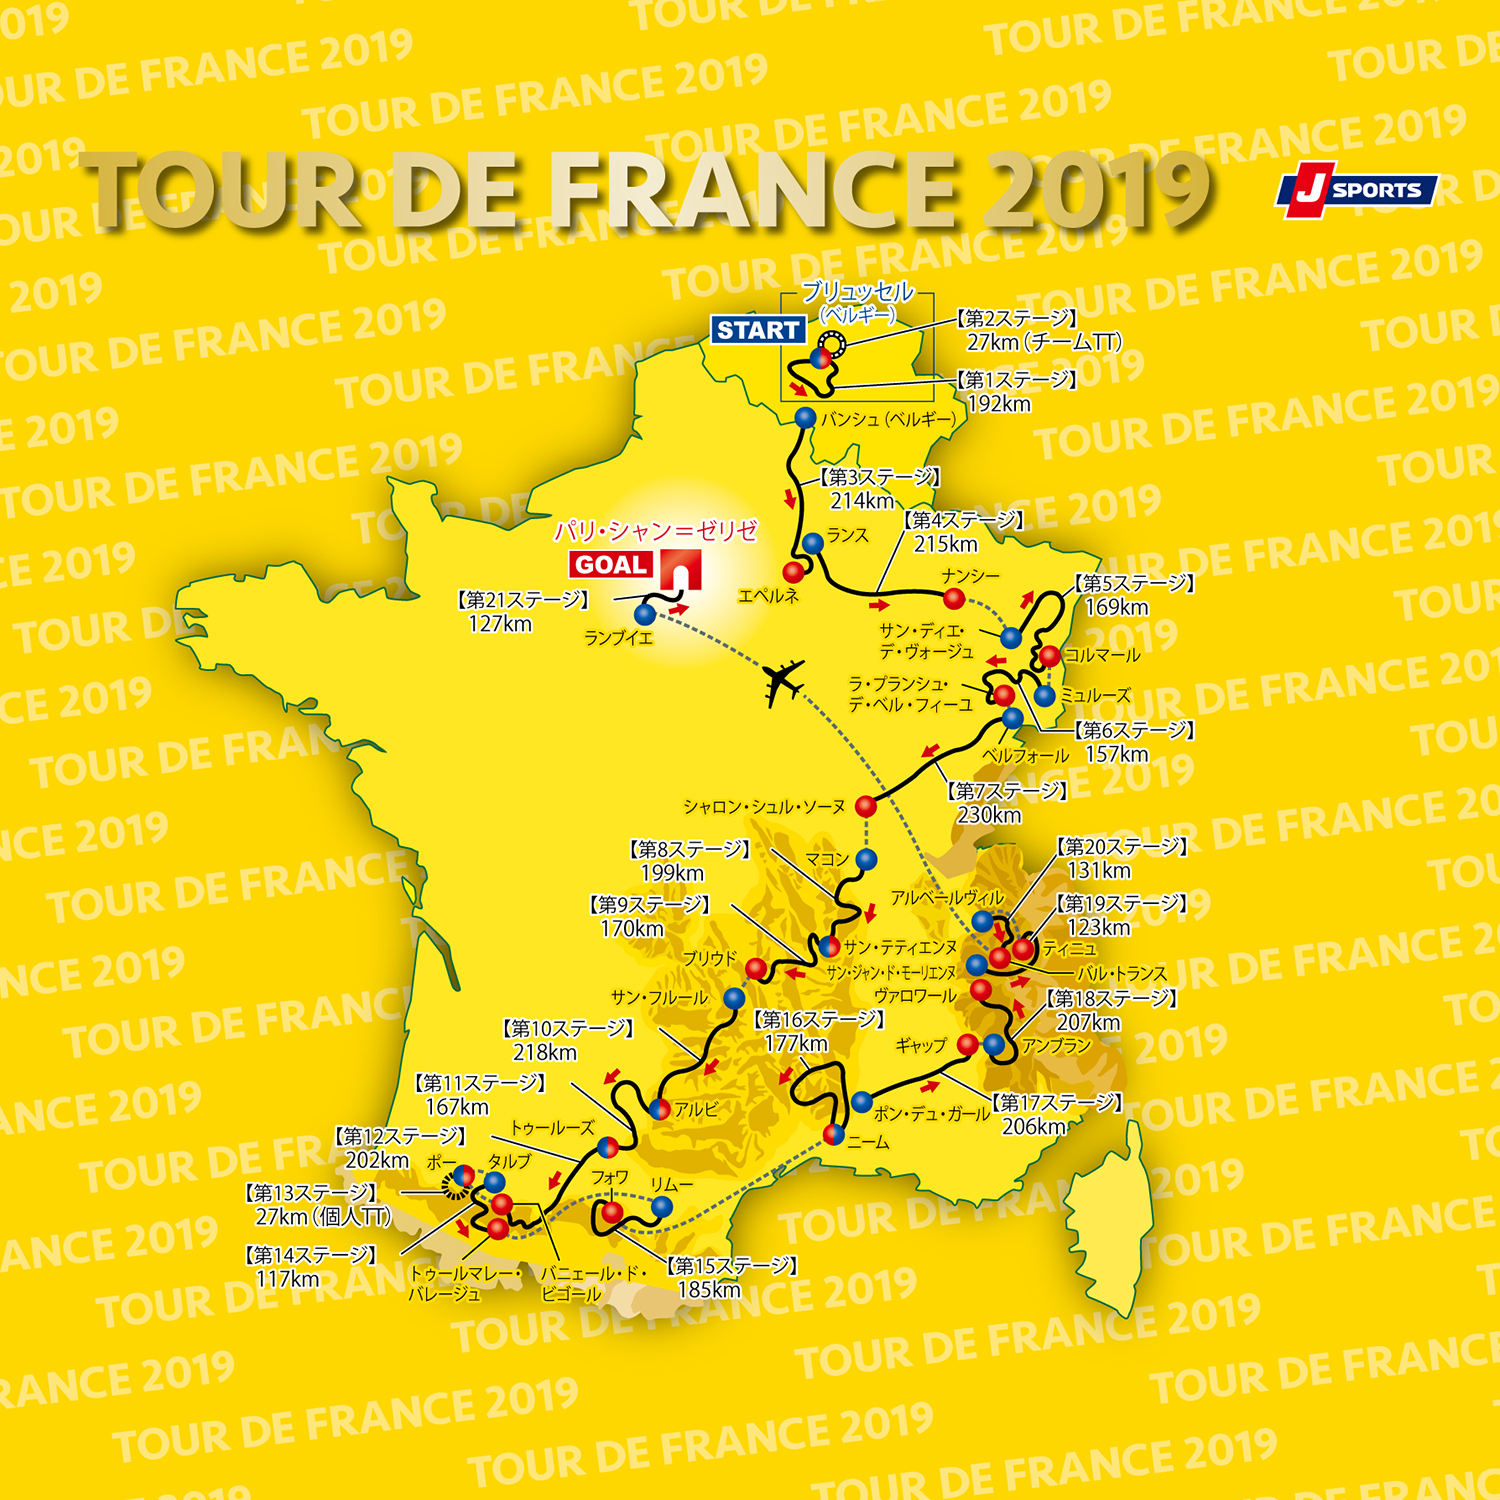 https://www.jsports.co.jp/img/tourdefrance/lower_pages/map_2019.jpg